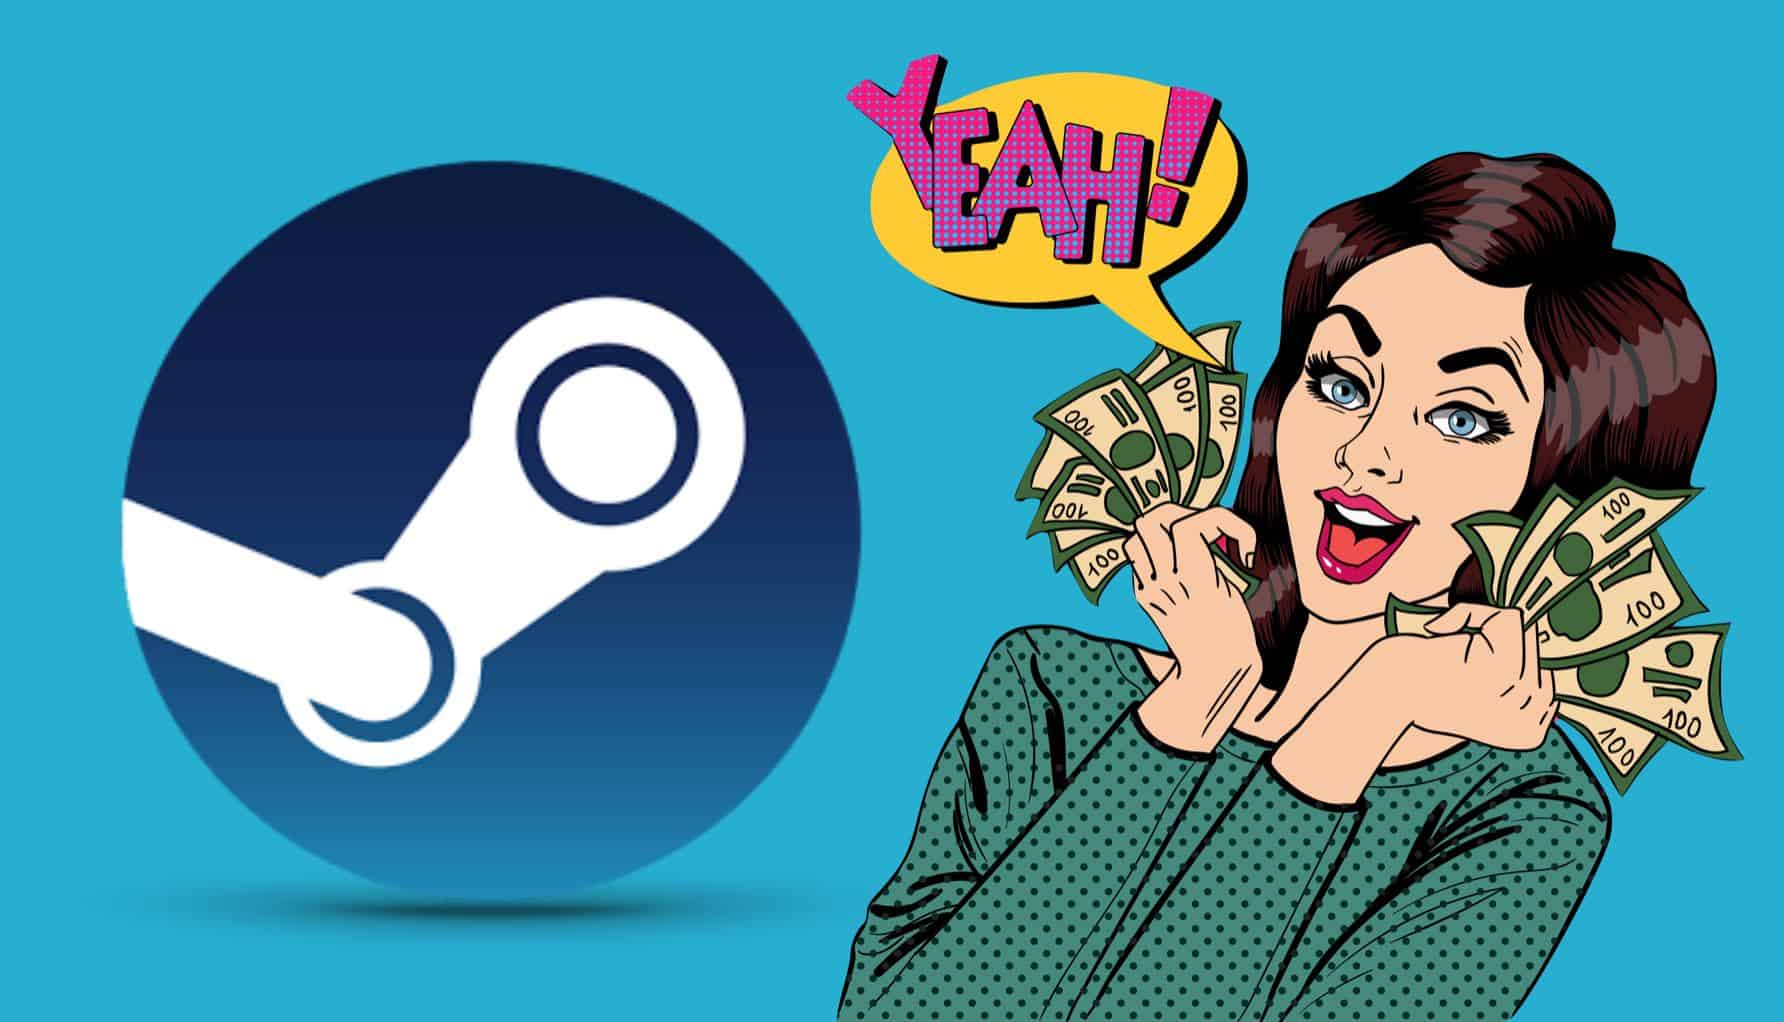 How-to-Make-Money-on-Steam-featured-image